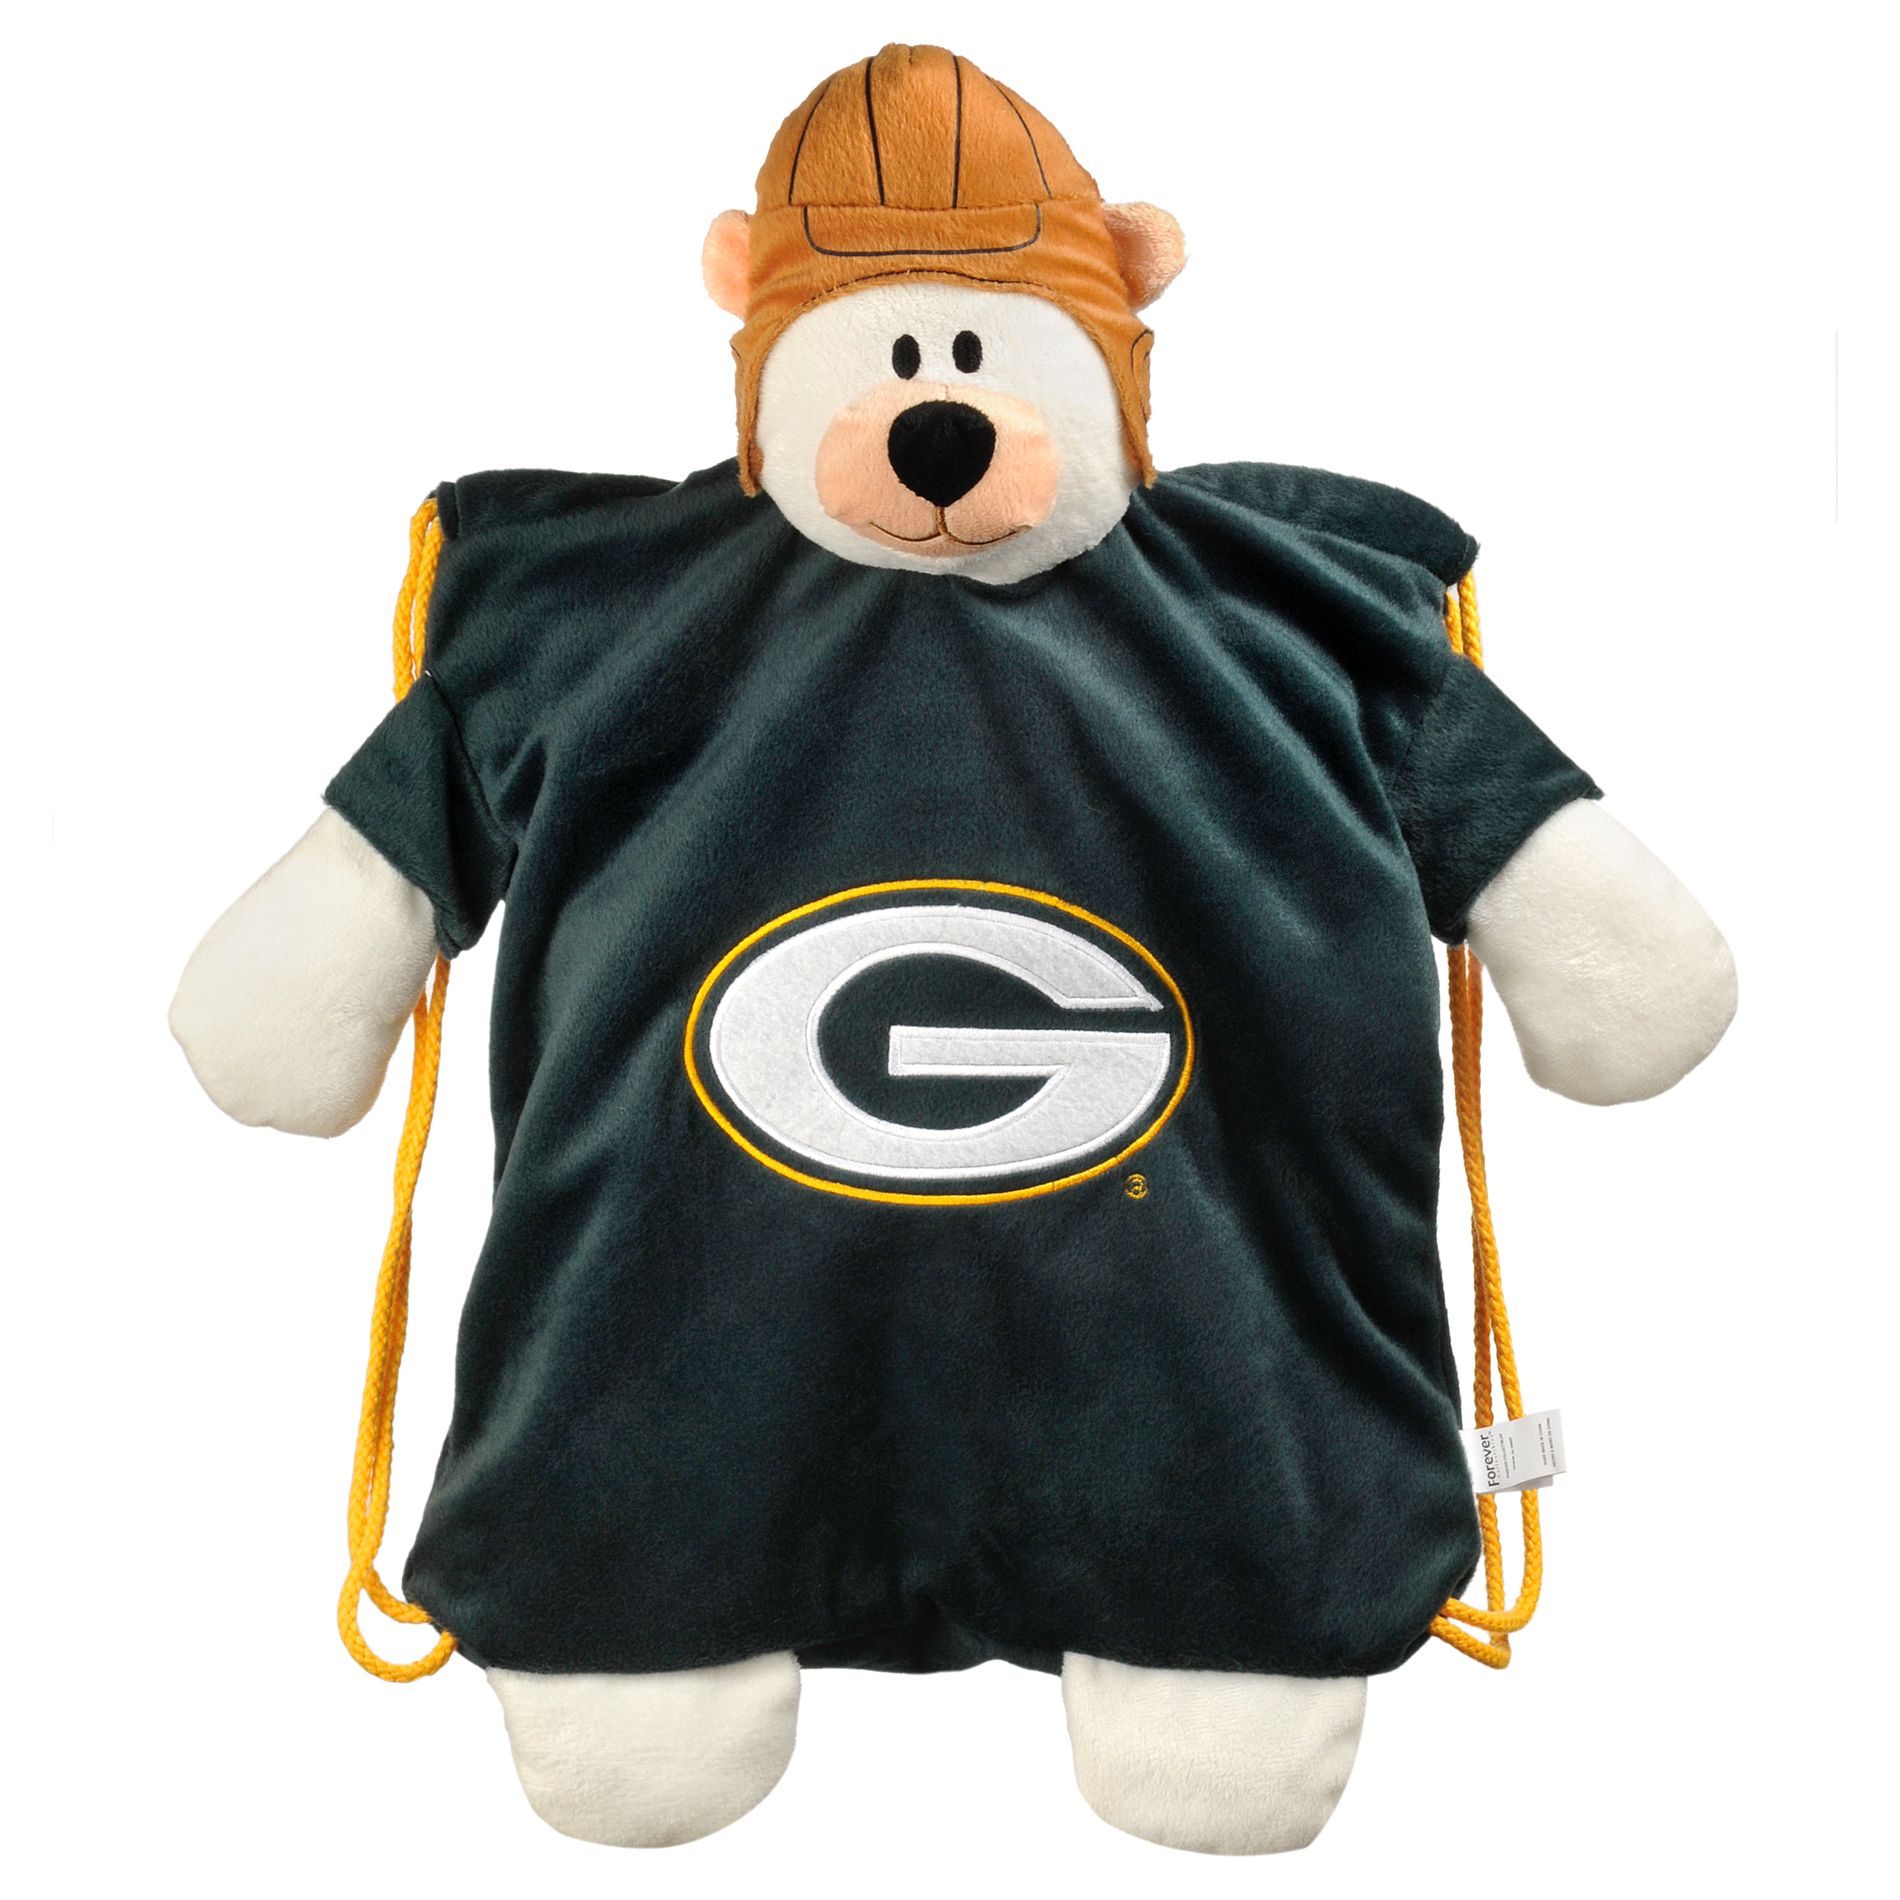 Forever Collectibles NFL Backpack Pal - Green Bay Packers